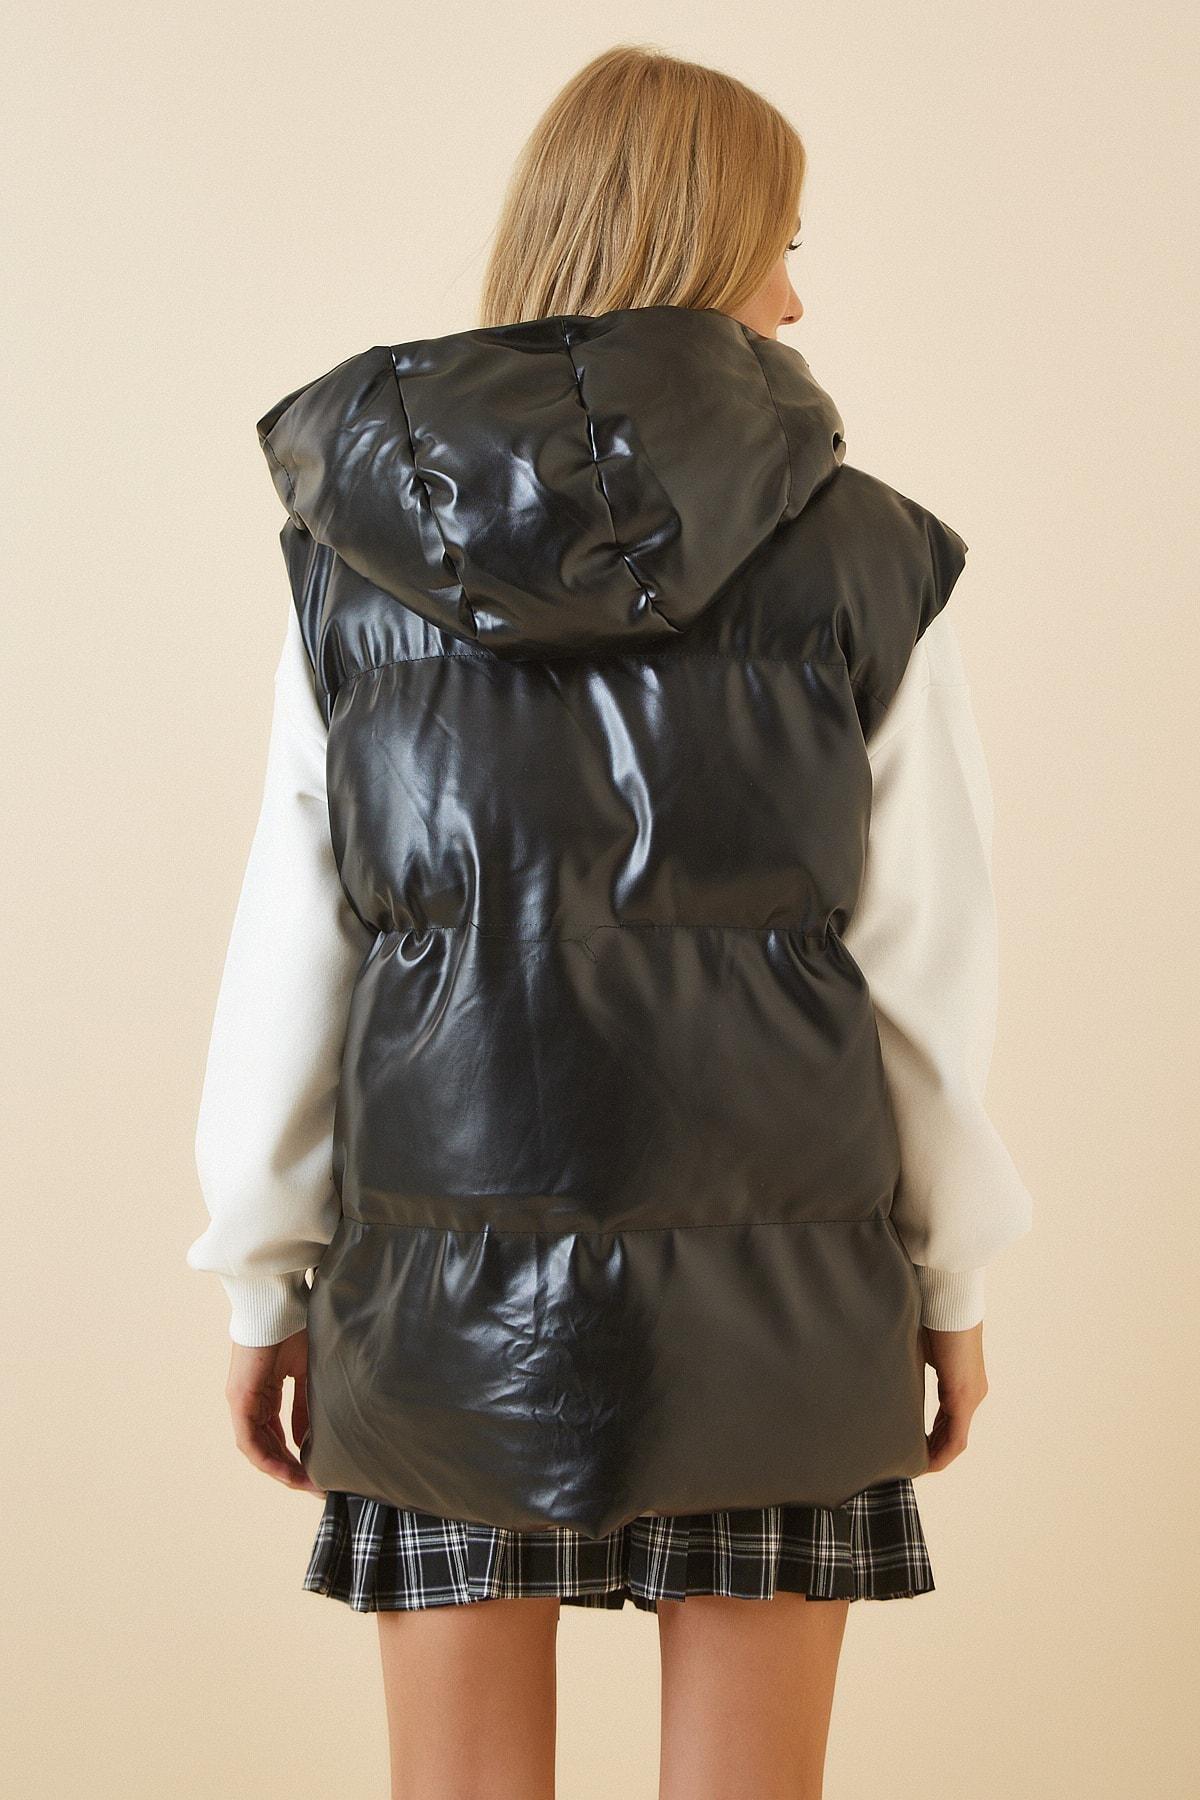 Happiness Istanbul - Black Puffer Vest